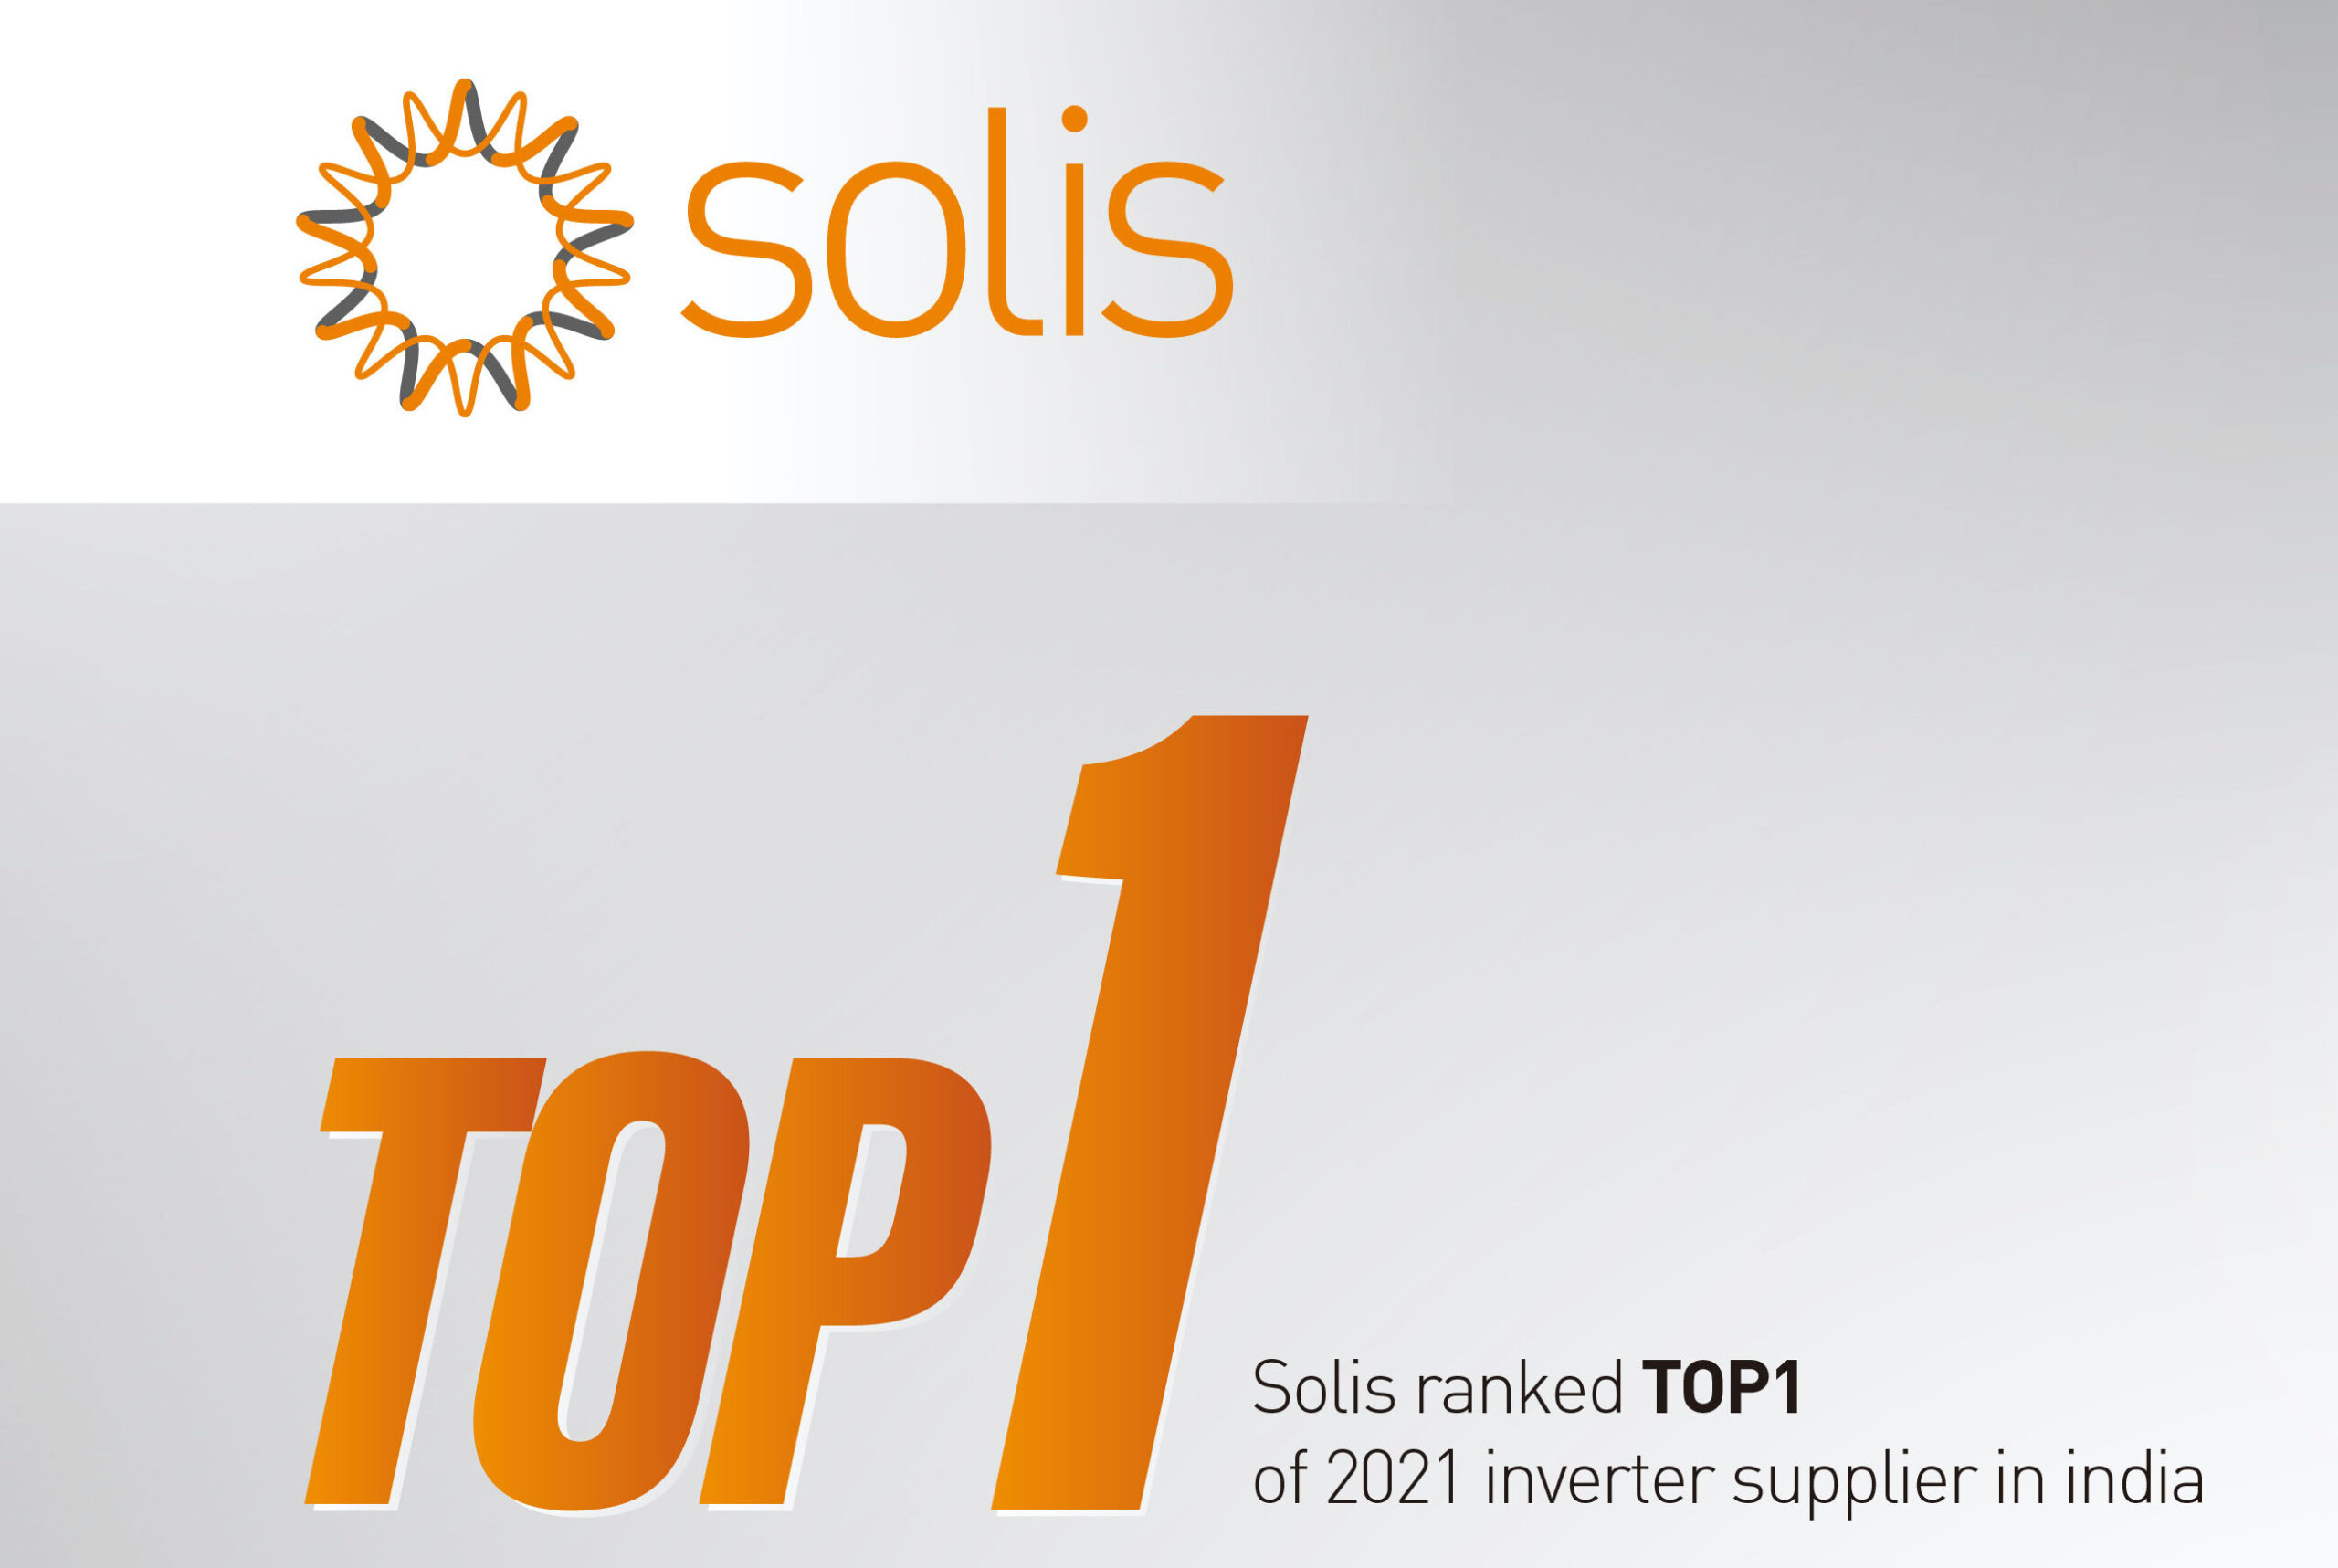 Solis：3rd Largest PV Inverter Manufacturer Globally According to